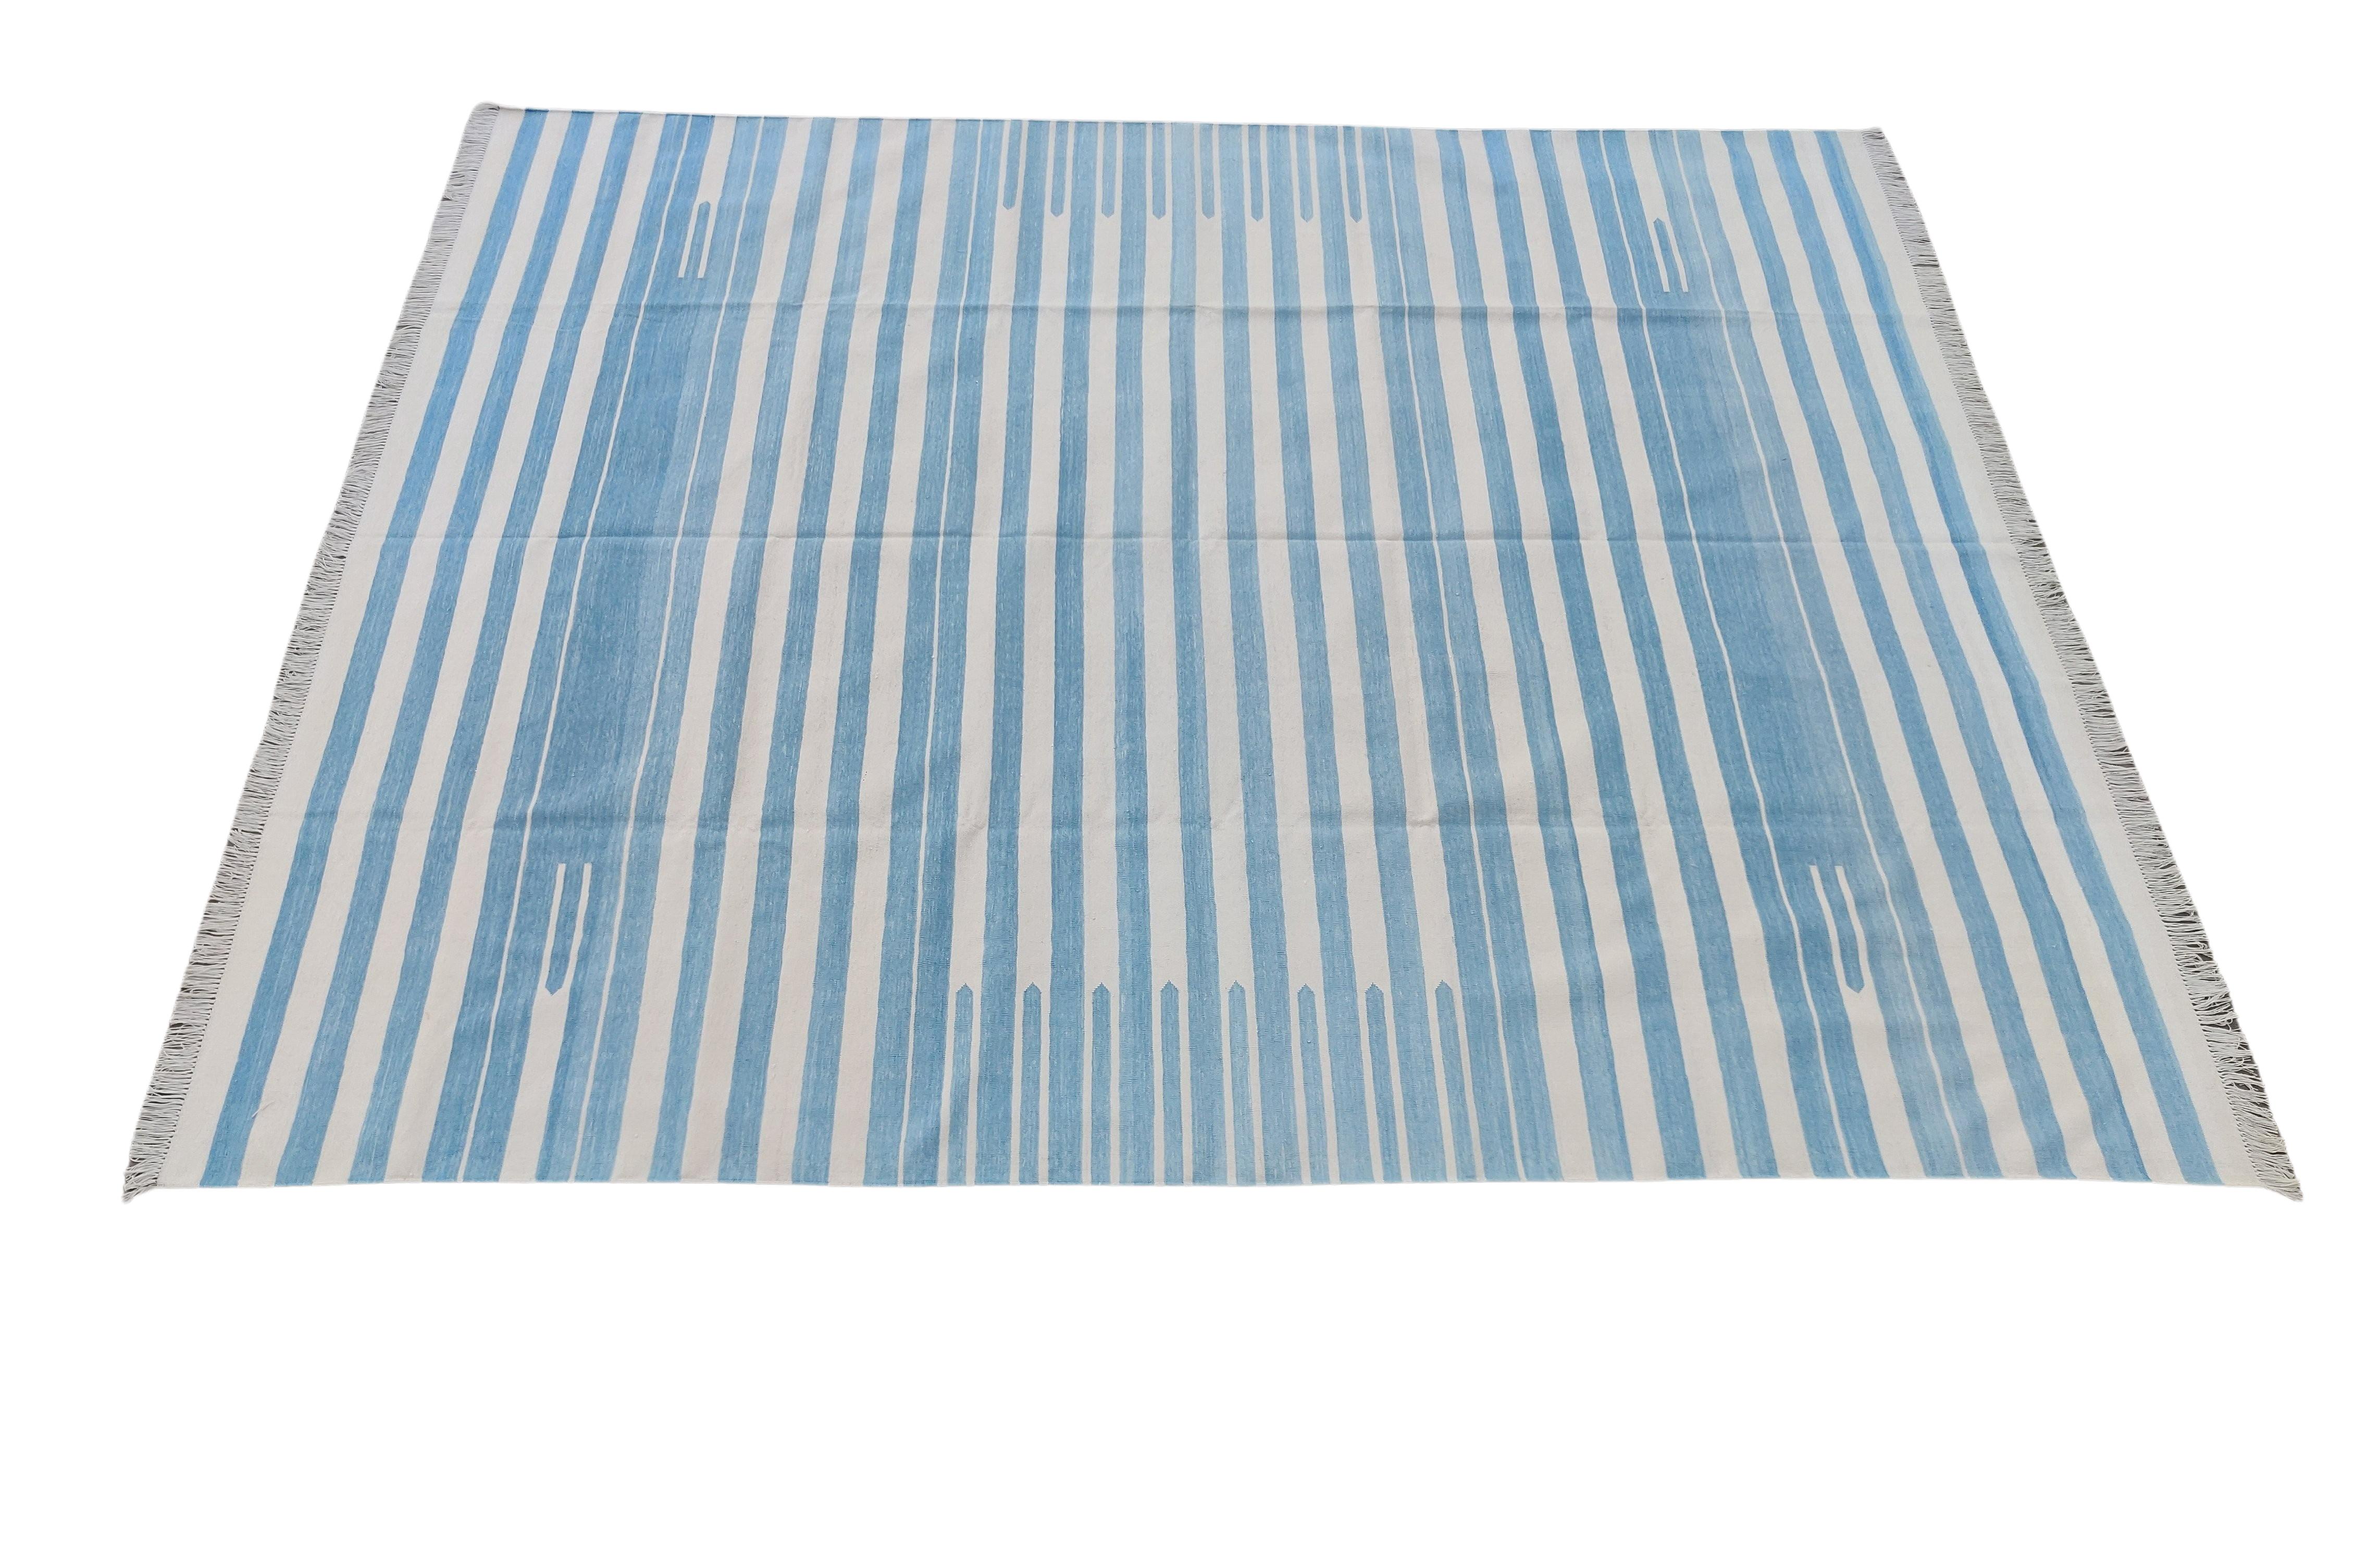 Handmade Cotton Area Flat Weave Rug, Blue And White Striped Indian Dhurrie Rug For Sale 5